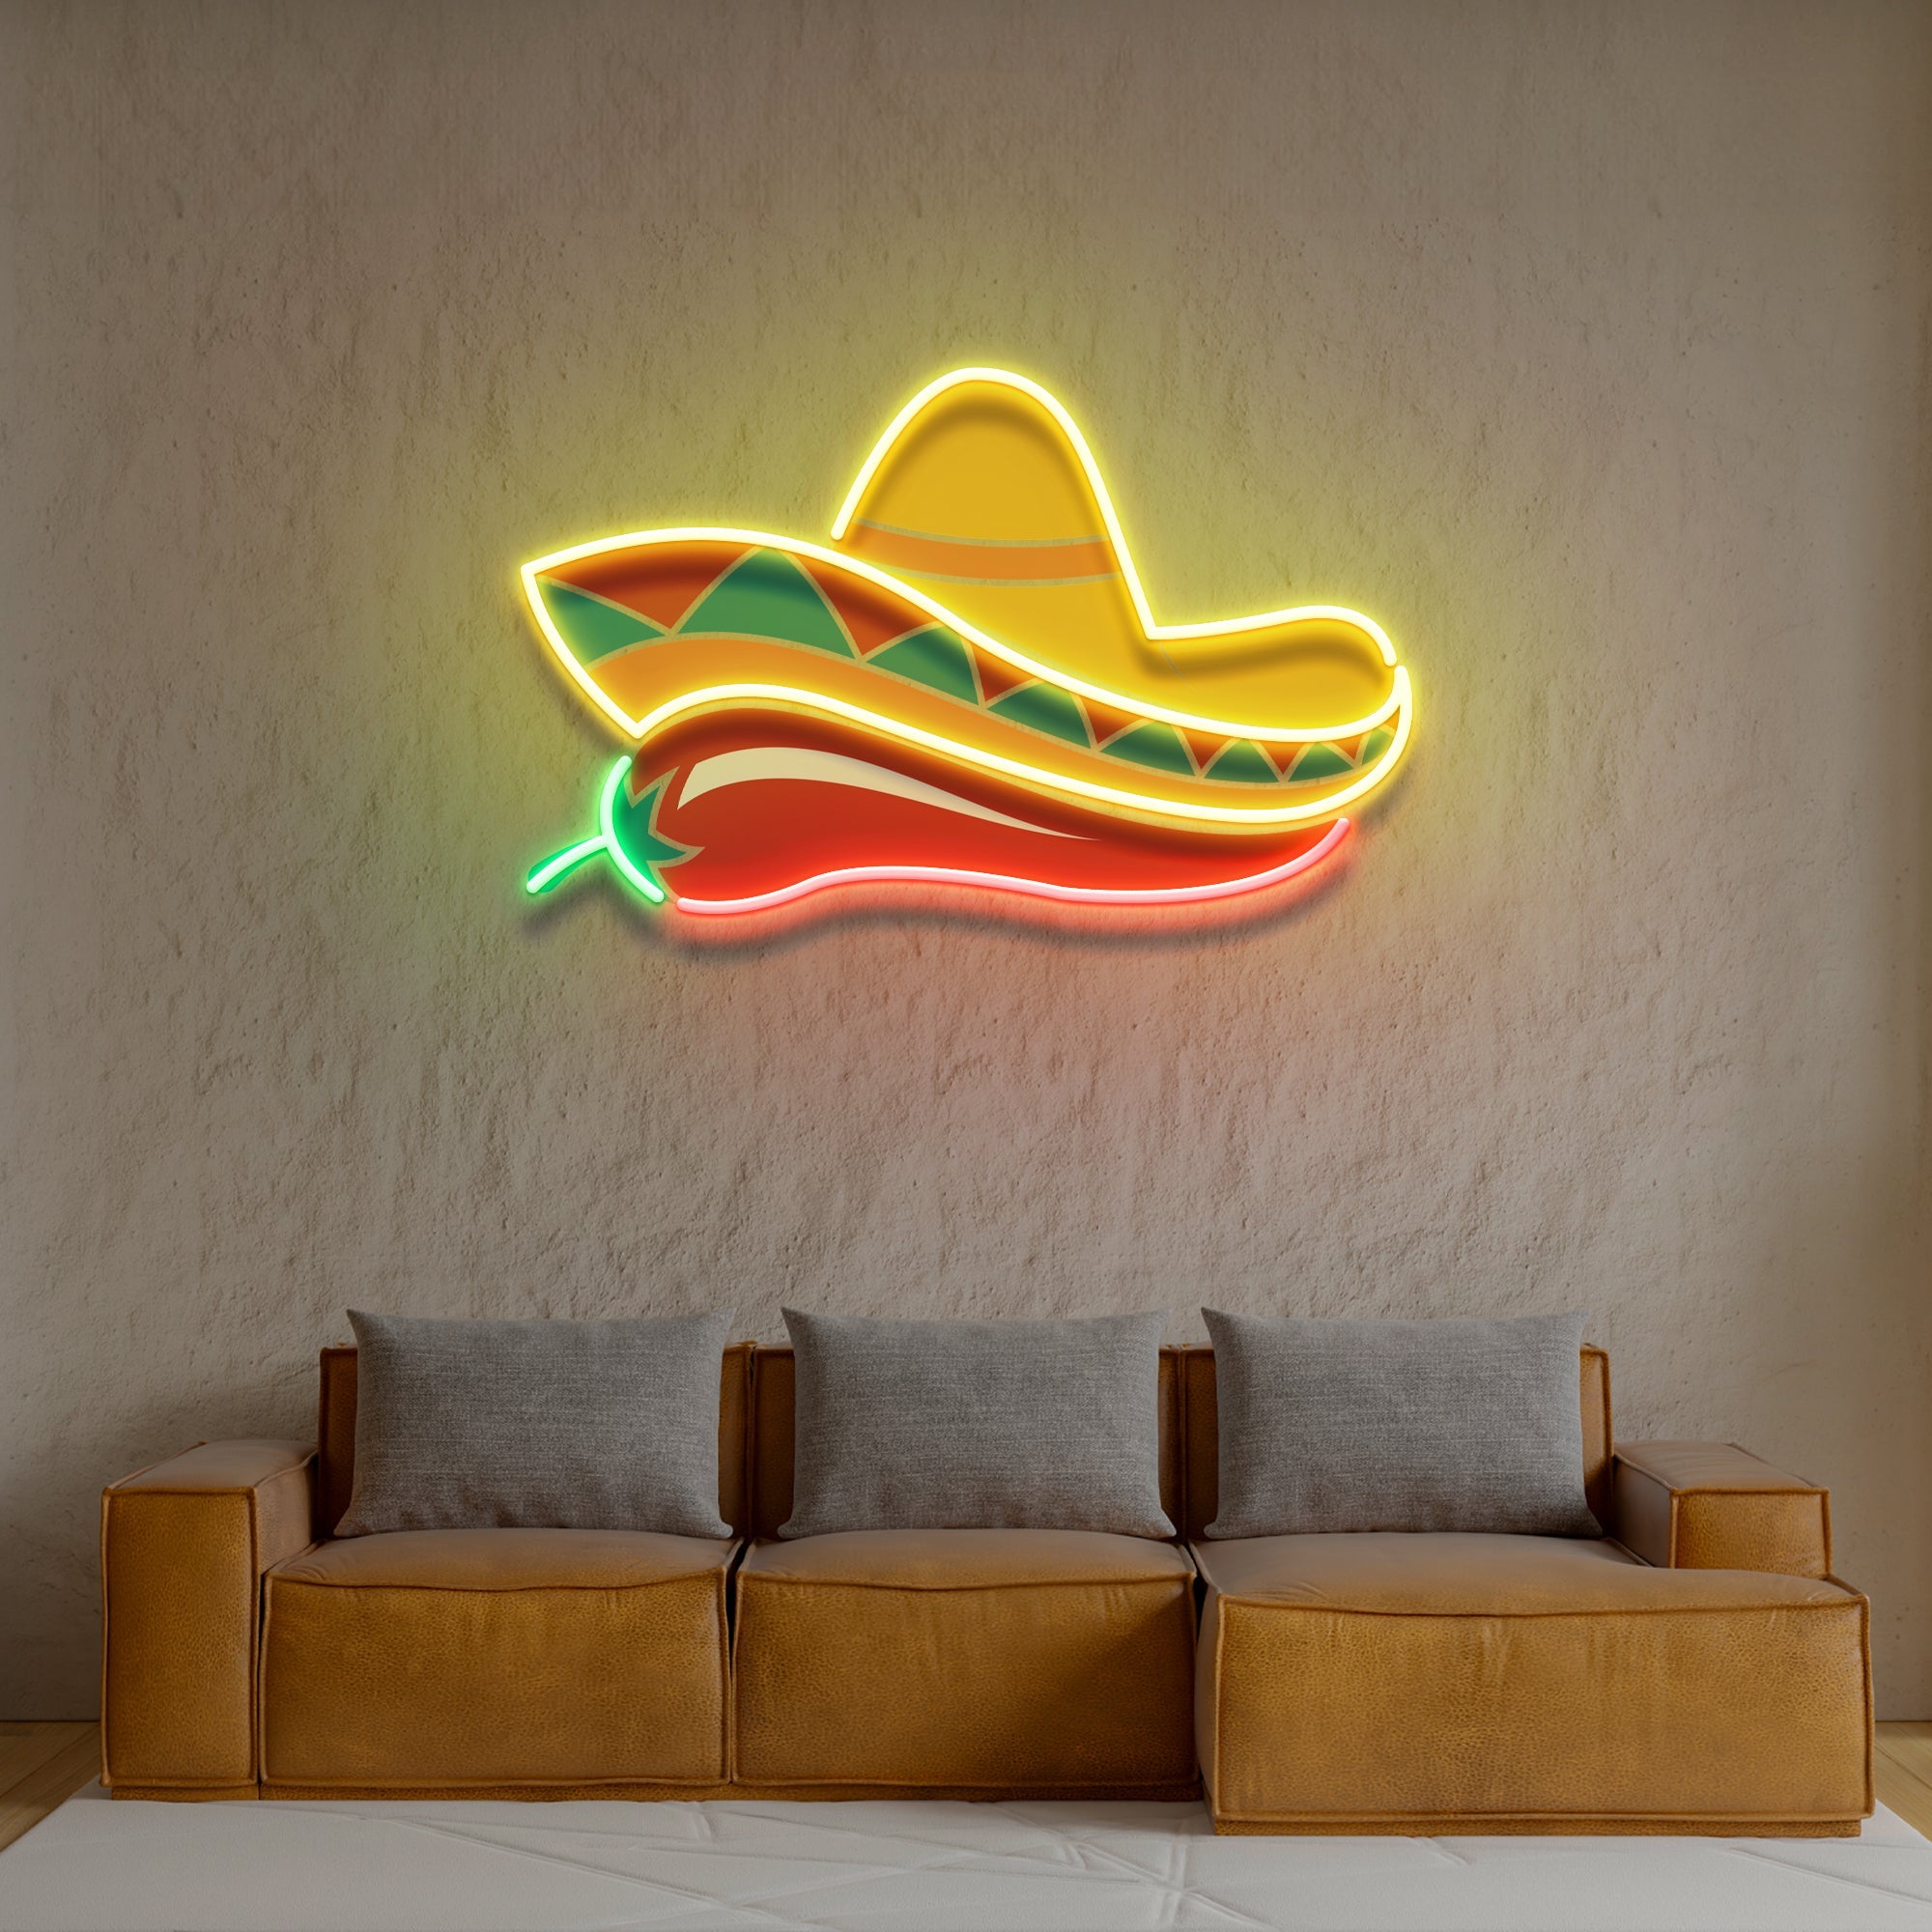 Mexican Sombrero Hat with Chili for Restaurant Artwork Led Neon Sign Light - Neonbir